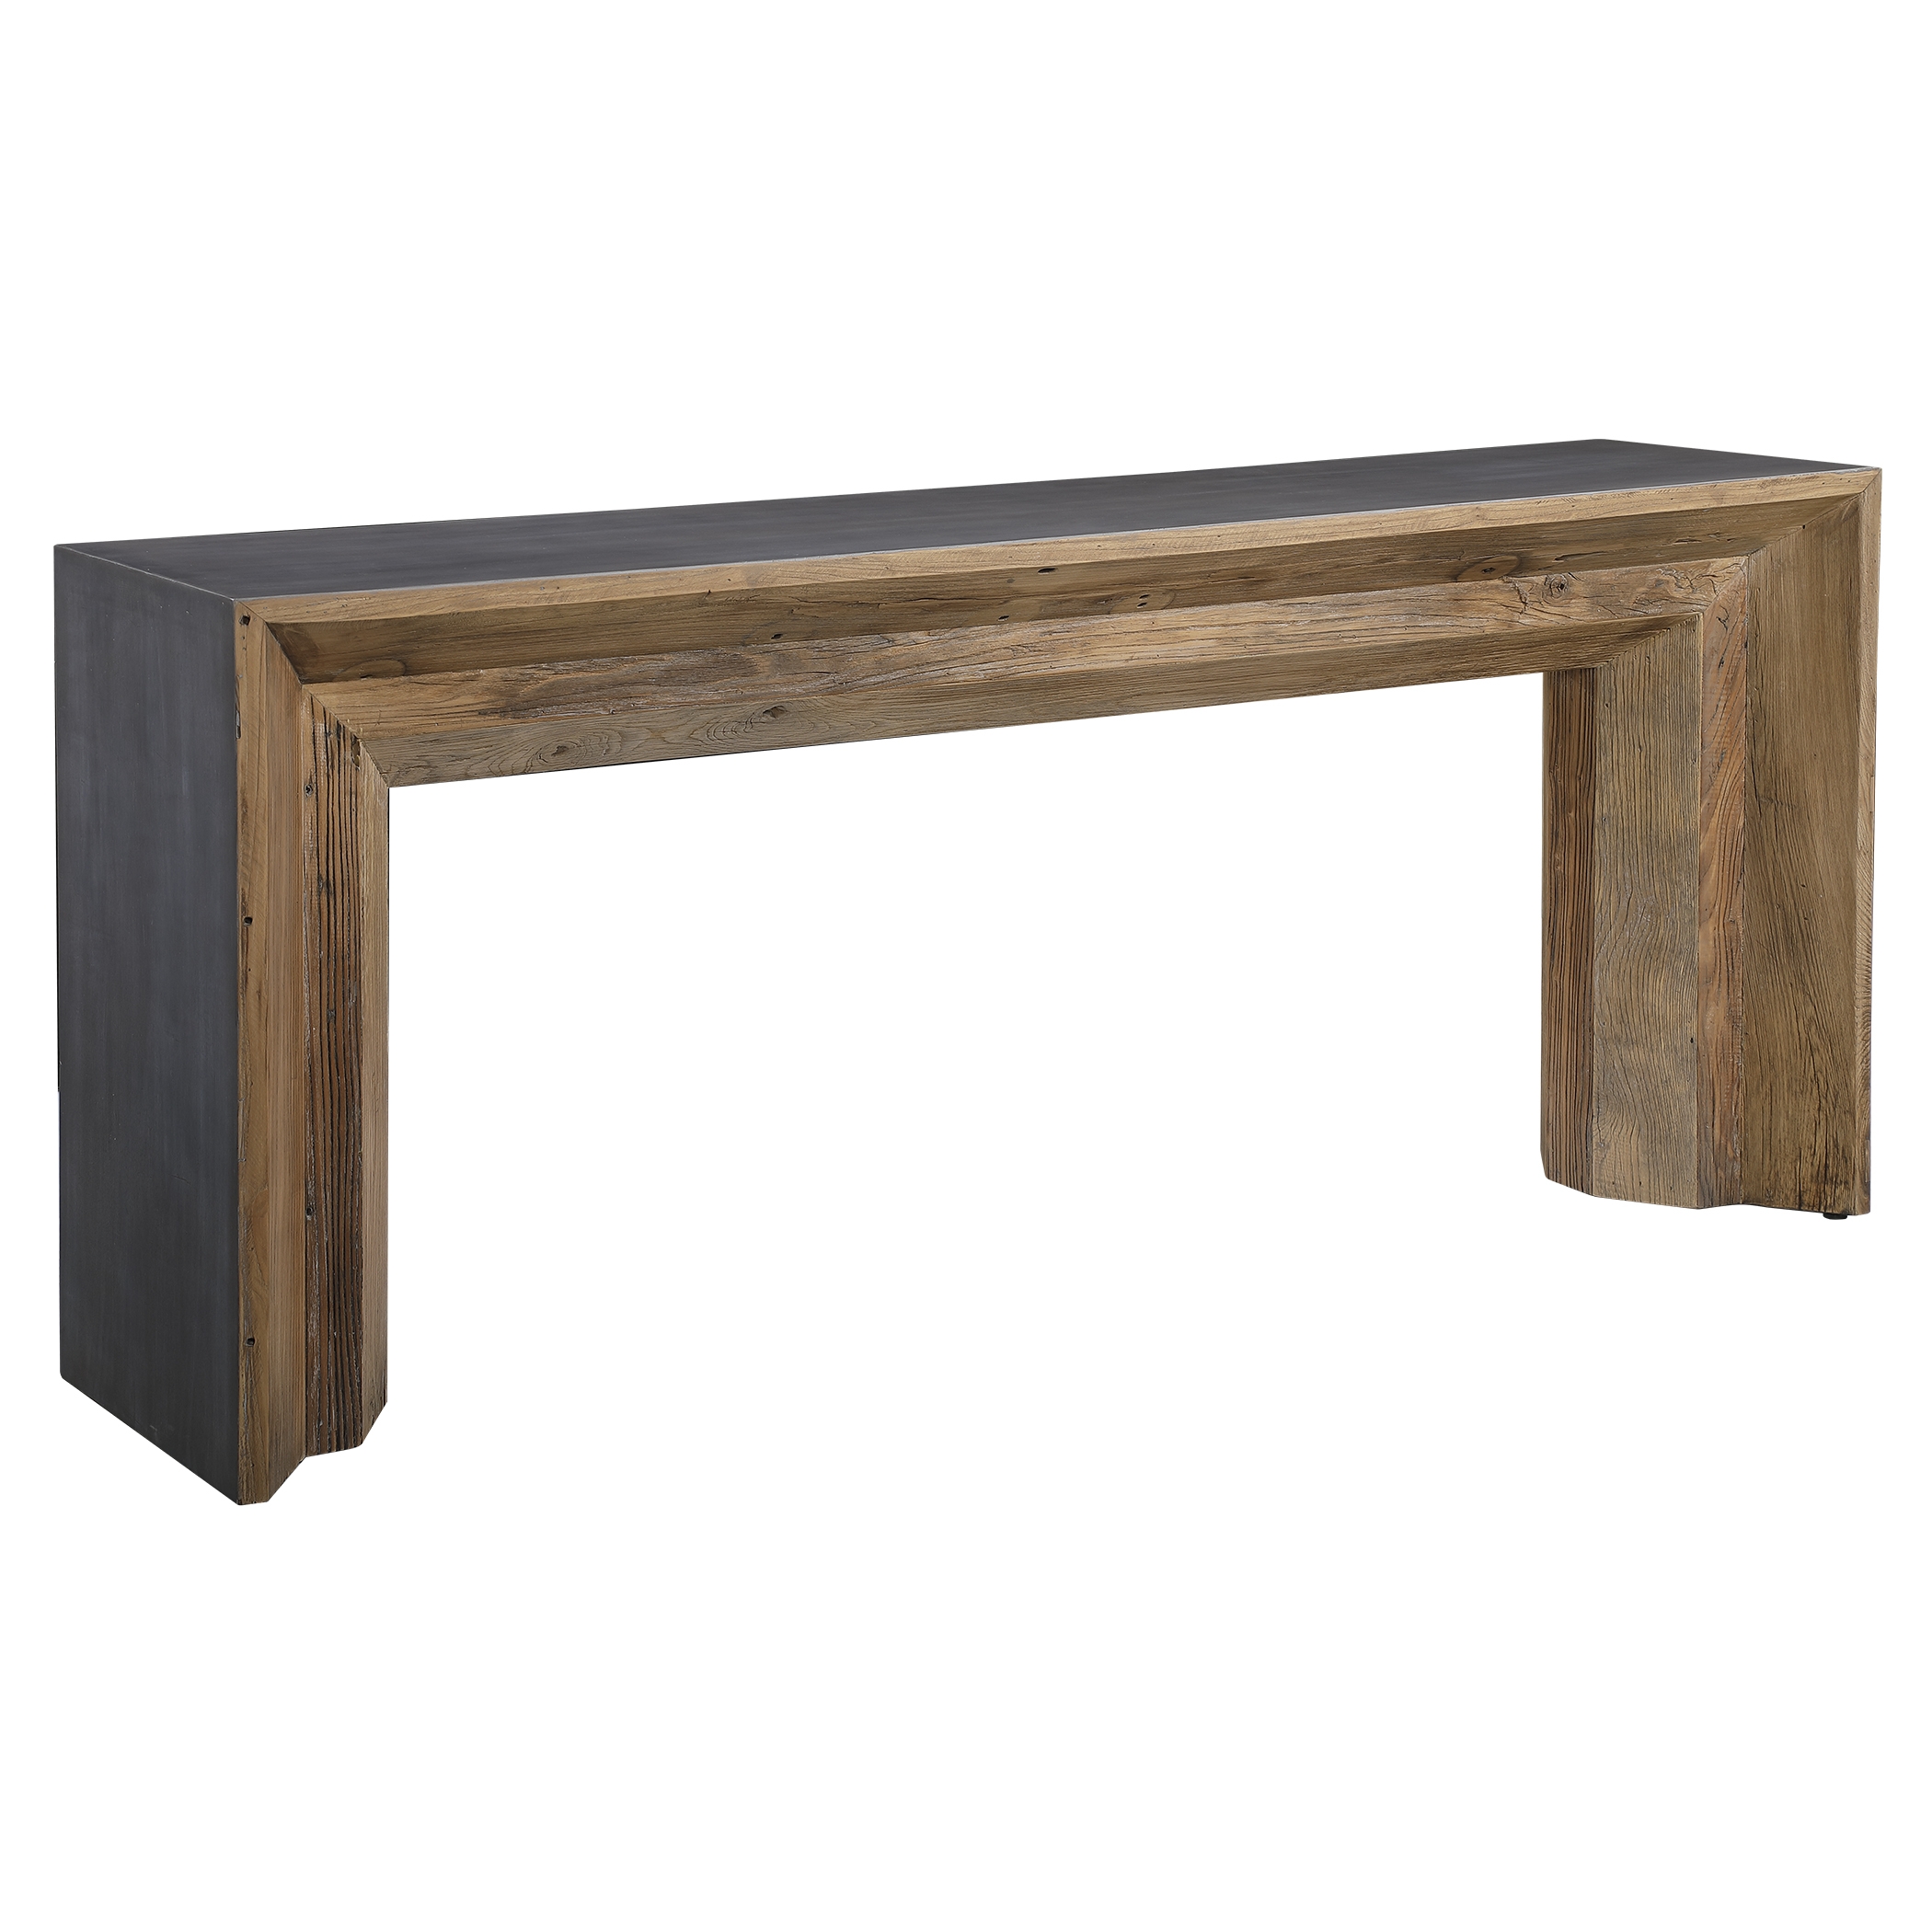 Vail Reclaimed Wood Console Table - Image 2